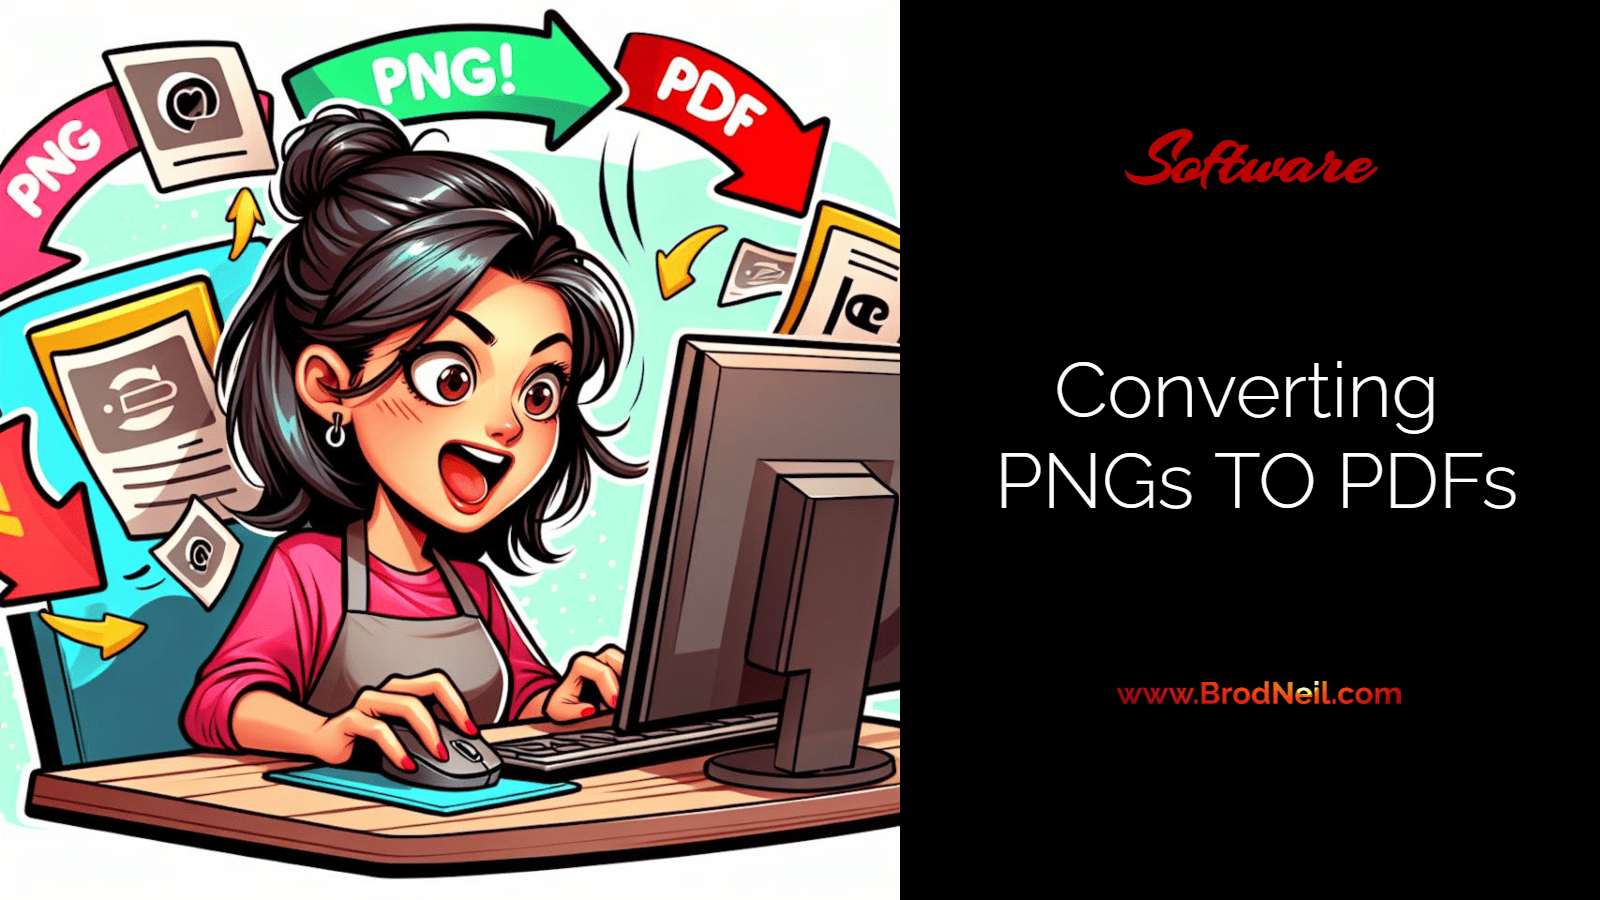 Converting PNGs TO PDFs